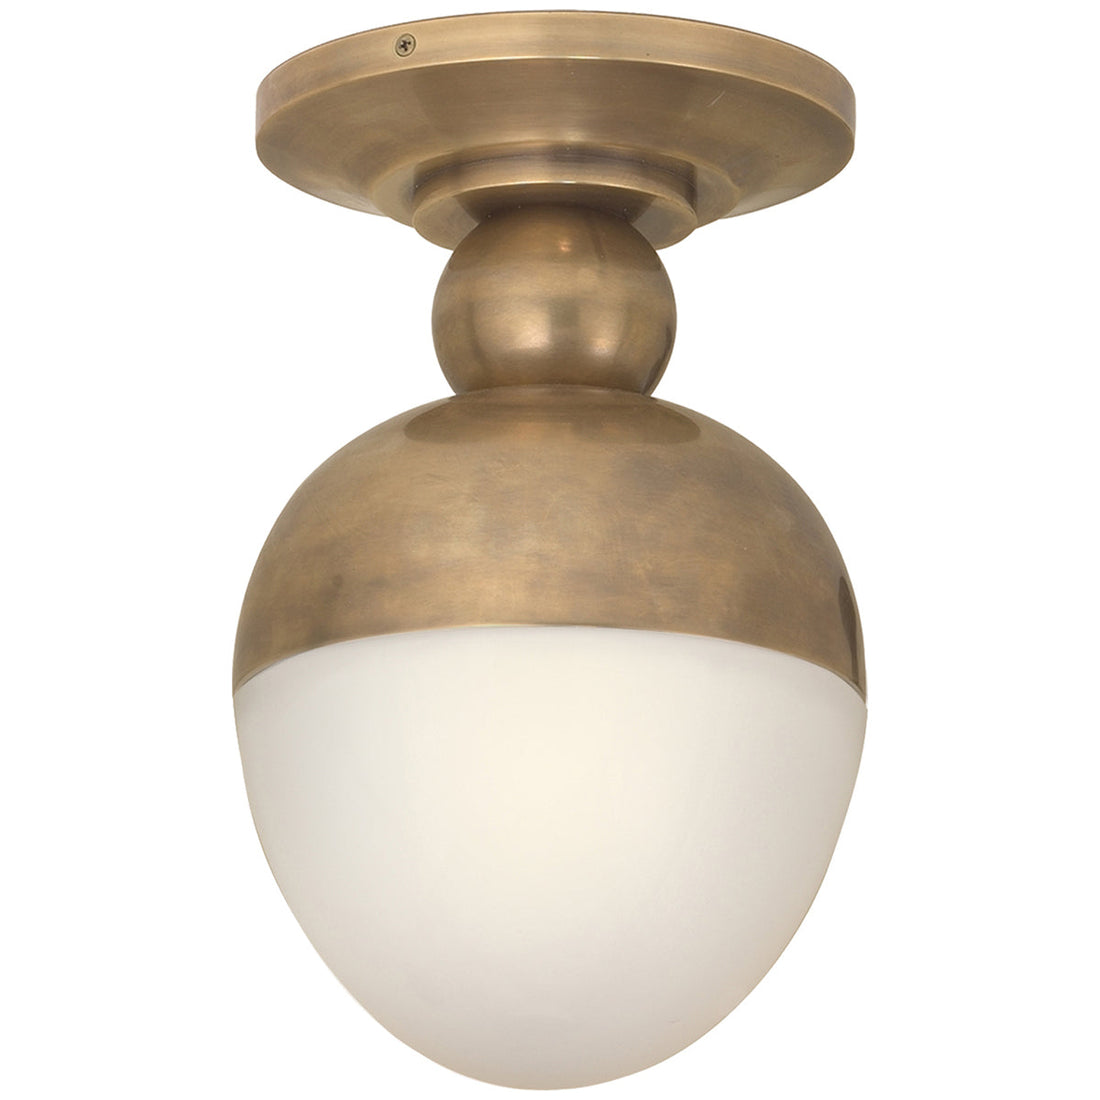 ALDERLY  Ceiling lamp Small Flush Mount in Antique Brass with